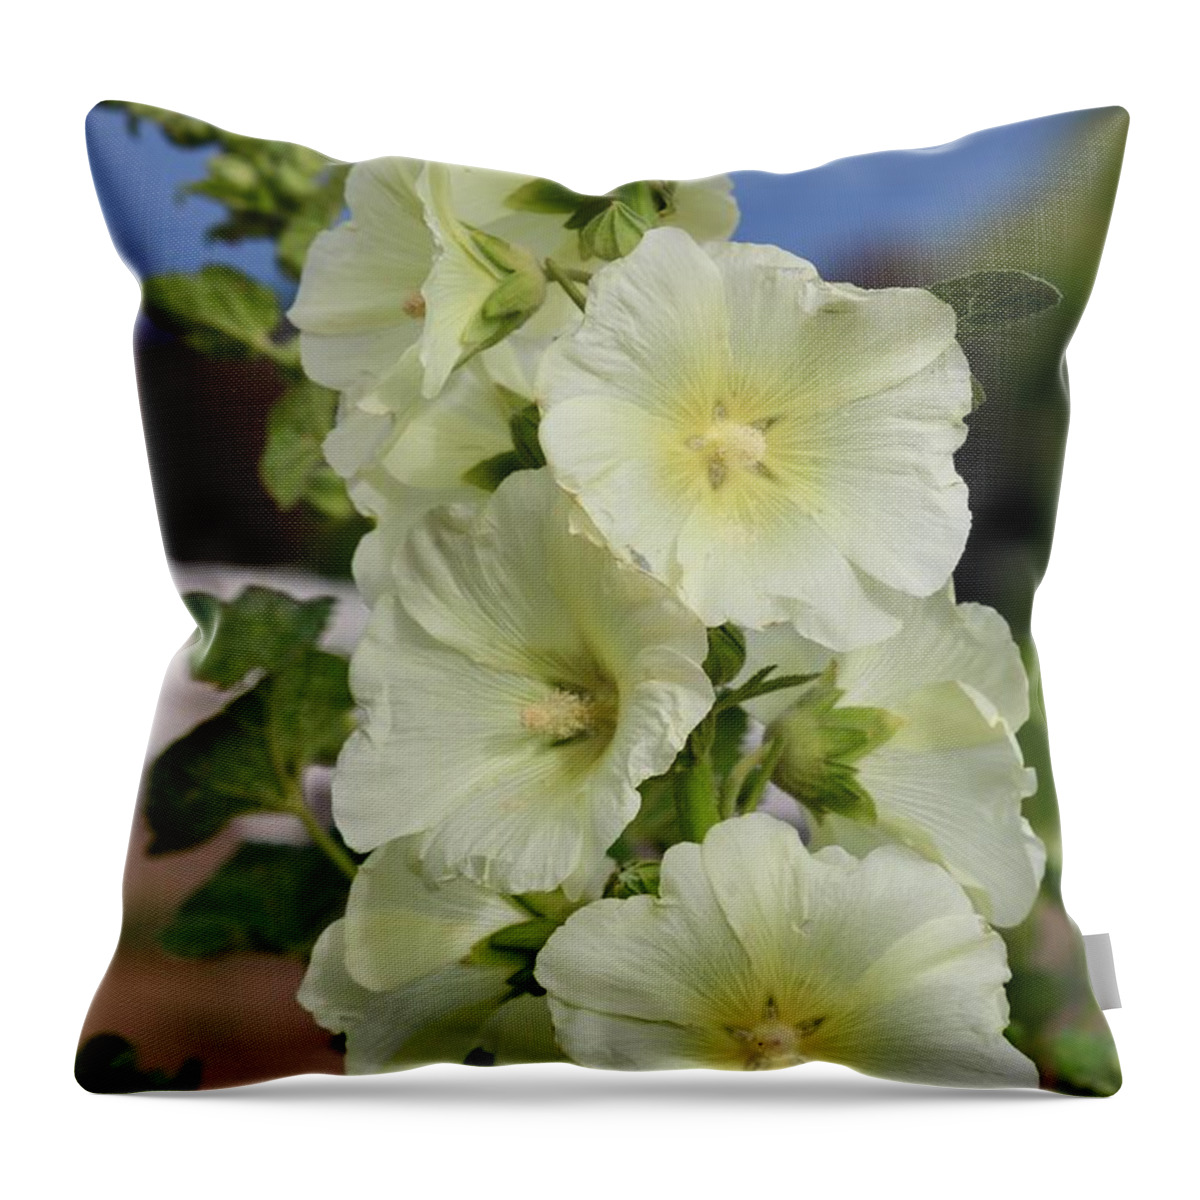 Hollyhock Throw Pillow featuring the photograph White Hollyhocks Close Up by Carol Groenen